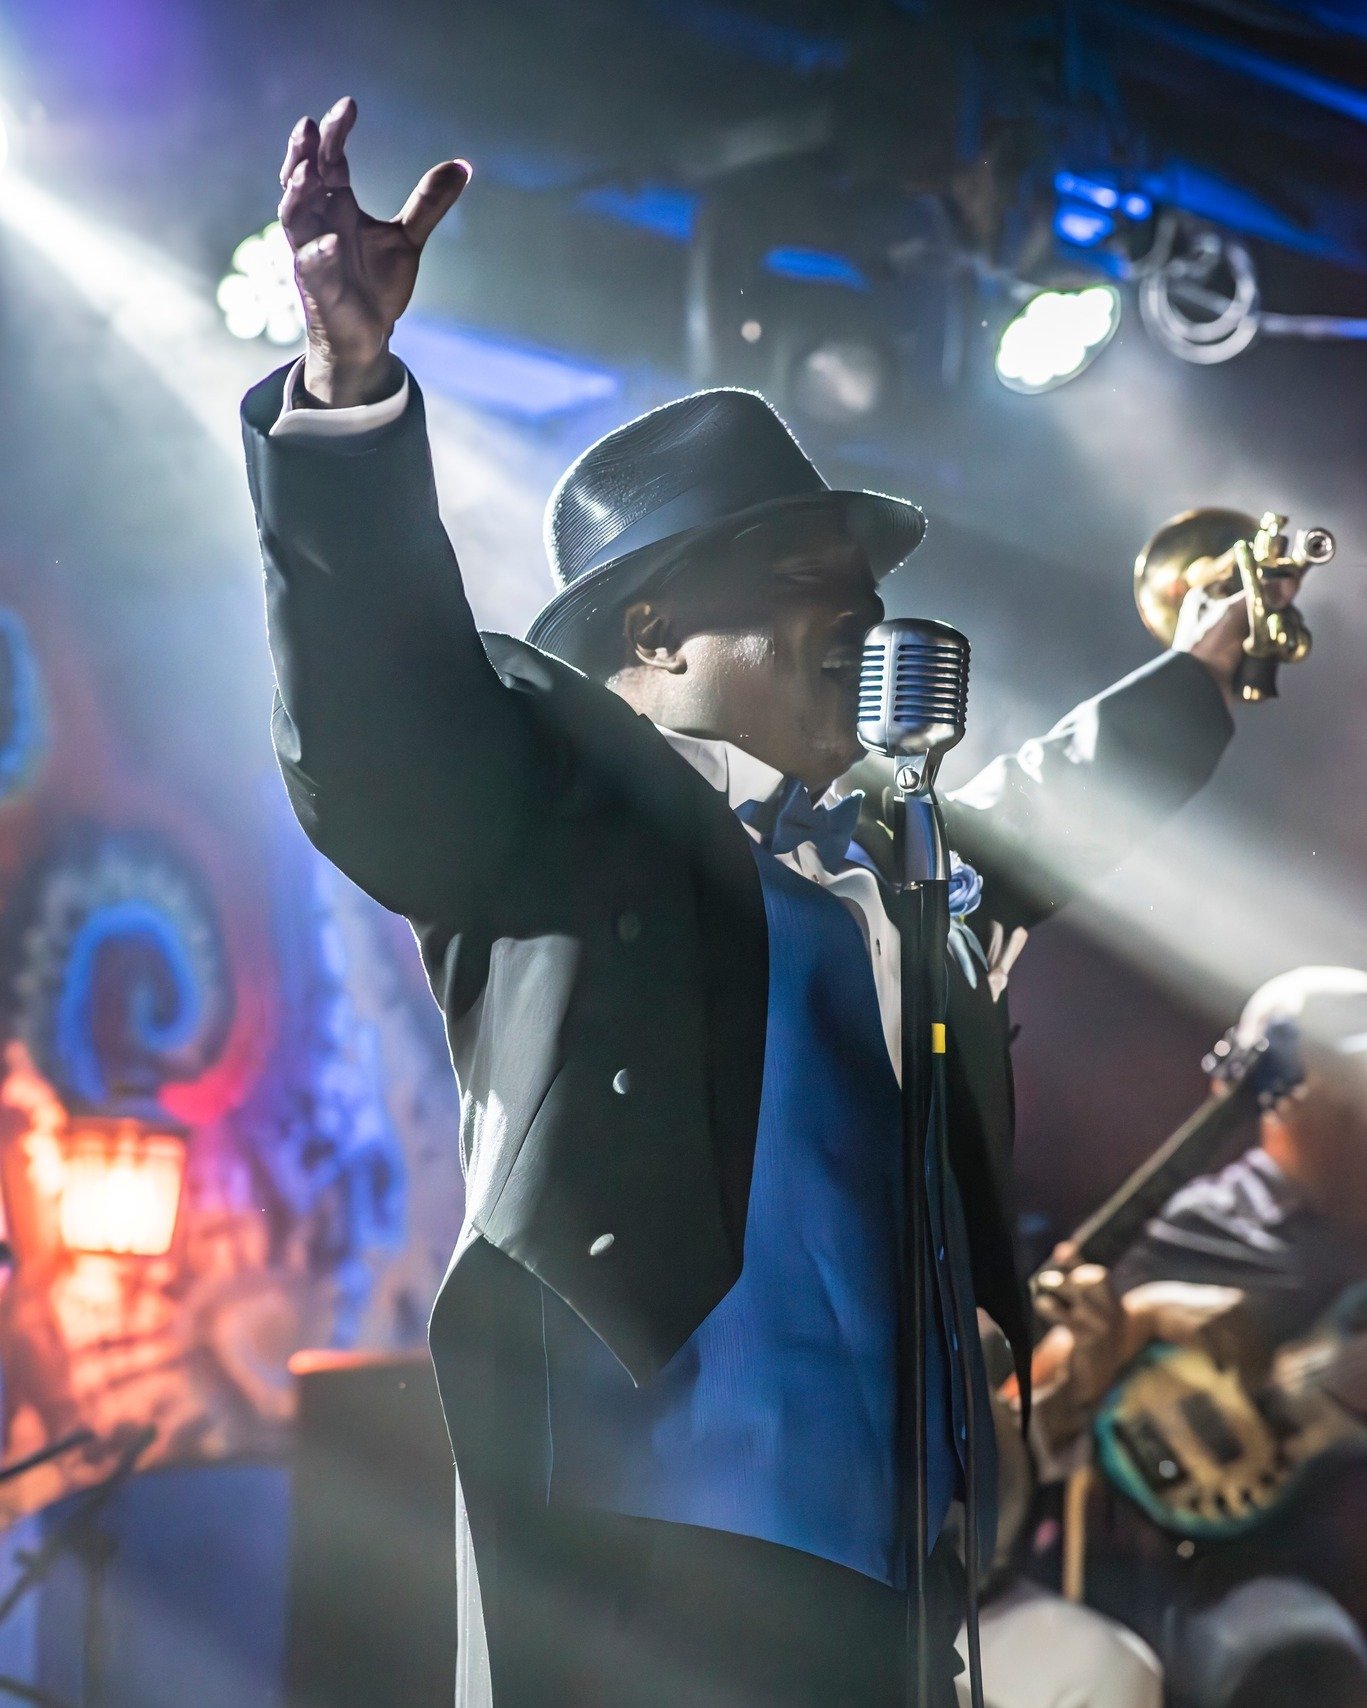 ALL ABOARD TONIGHT!
17th Annual Backbeat JazzFest Series presents Kermit Ruffins &amp; the BBQ Swingers at 11PM!
✨🌙 
FRIDAY NIGHT 5/3: Marco Benevento, Blaque Dynamite, Xavier Lynn Funk Party 
Advance Tickets bluenilelive.com

The Caesar Brothers' F